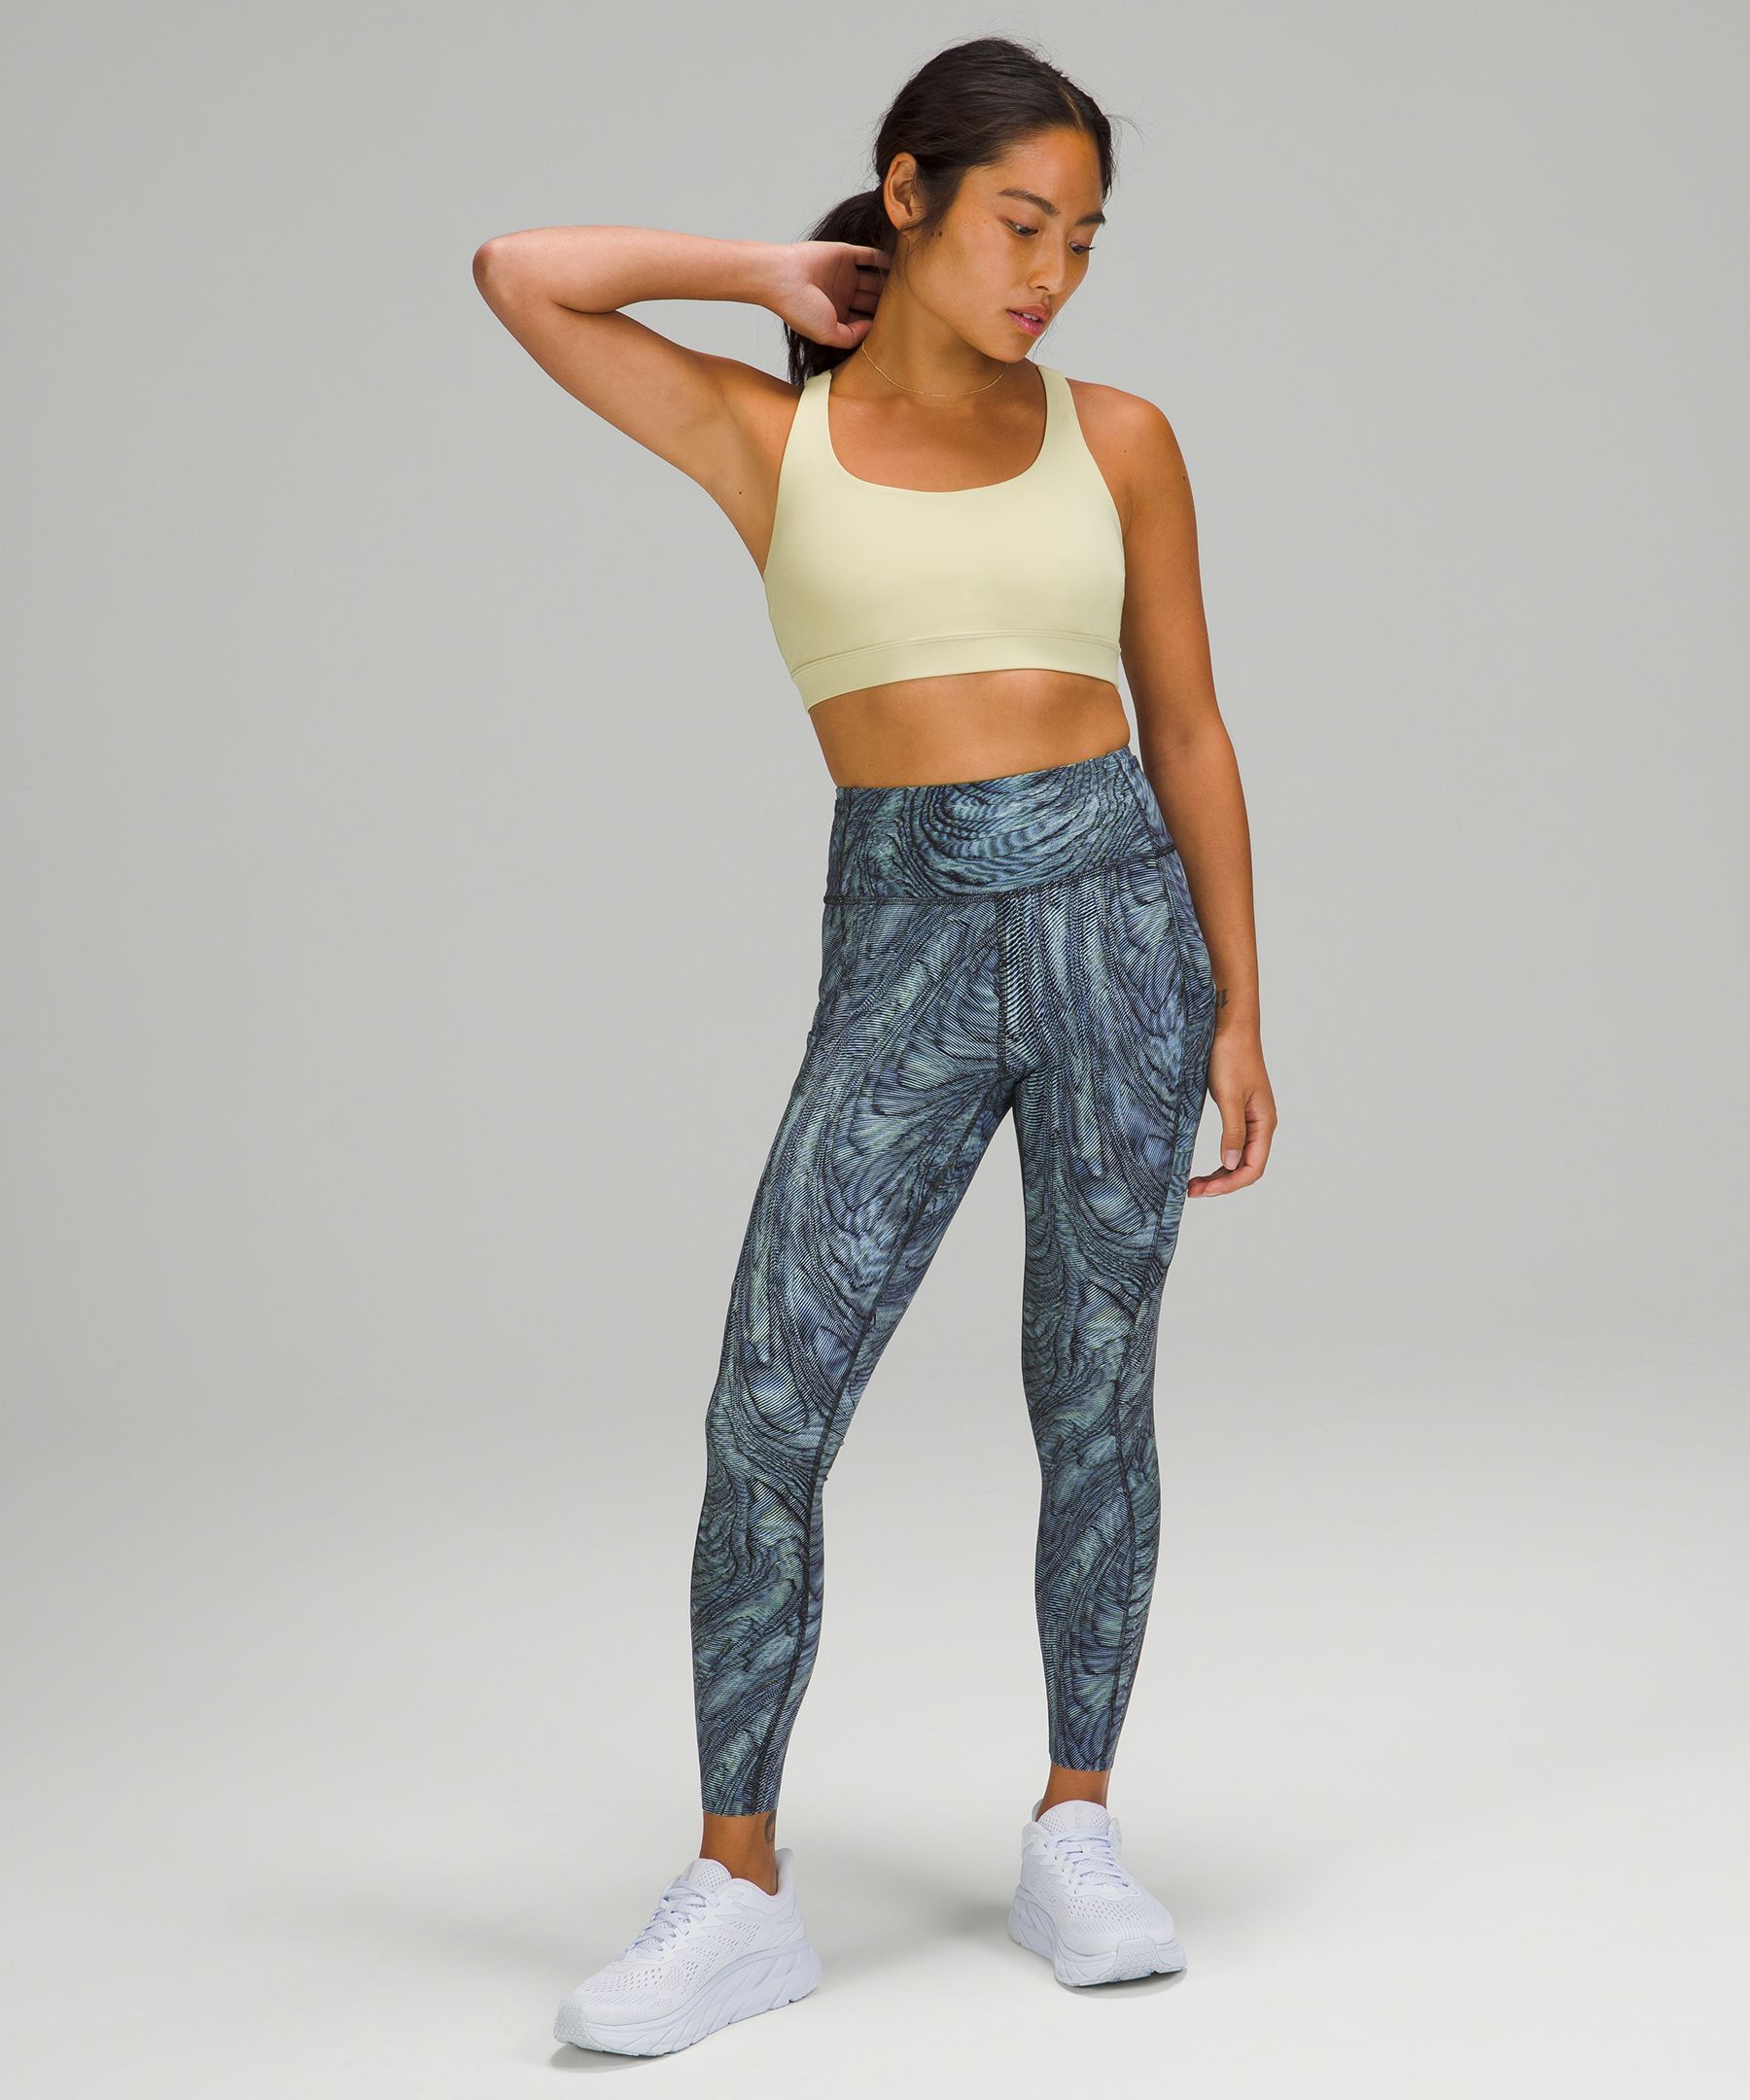 Lululemon Fit Review: Wunder Under HR 7/8 Tight *Mesh, The Ease